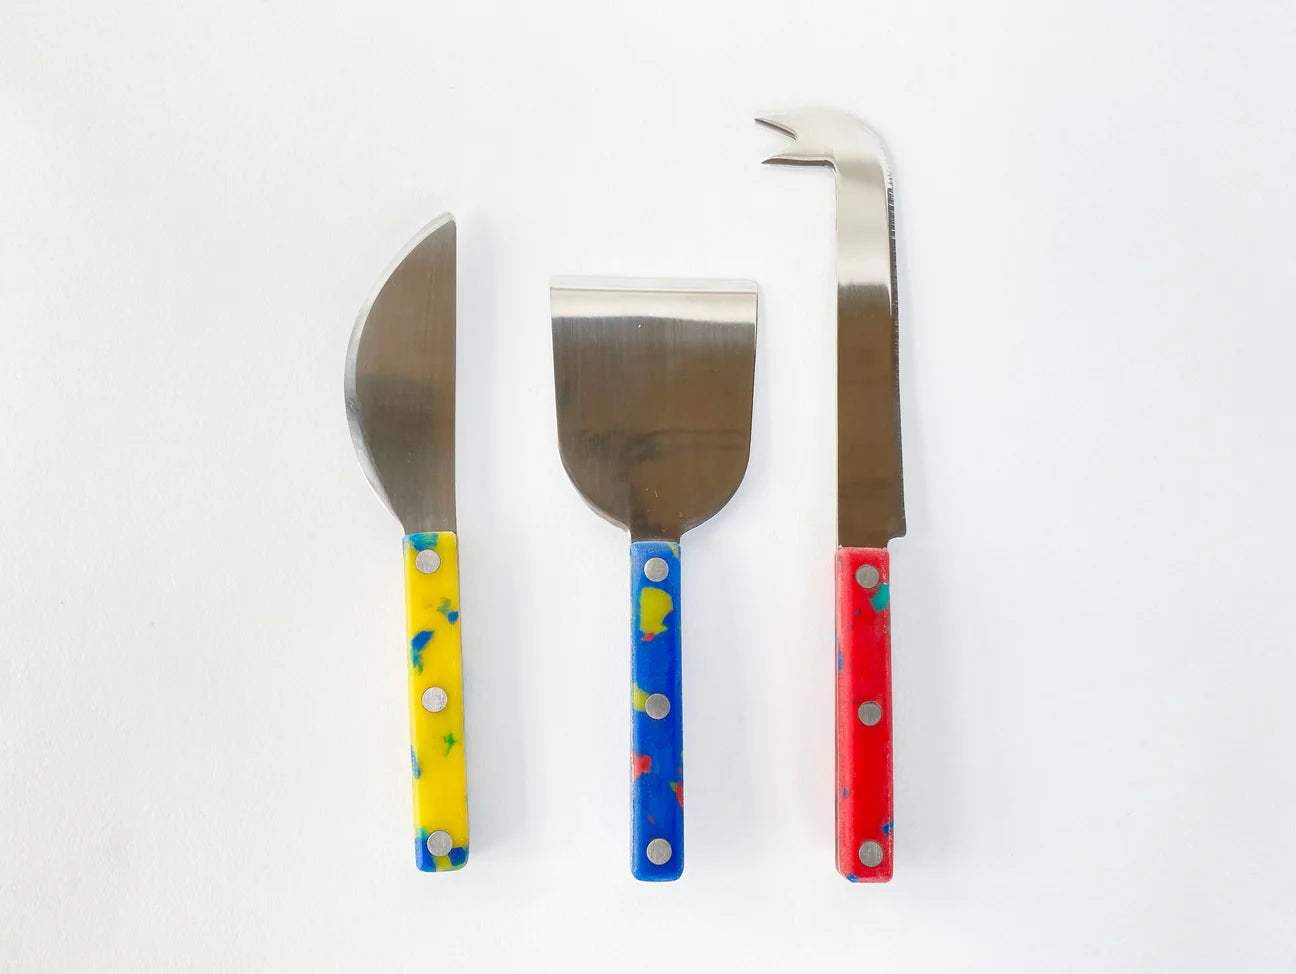 Set of 3 cheese knives, each with a different colored handle -- yellow (soft cheese), blue (semi-soft cheese) and red (hard cheese) 